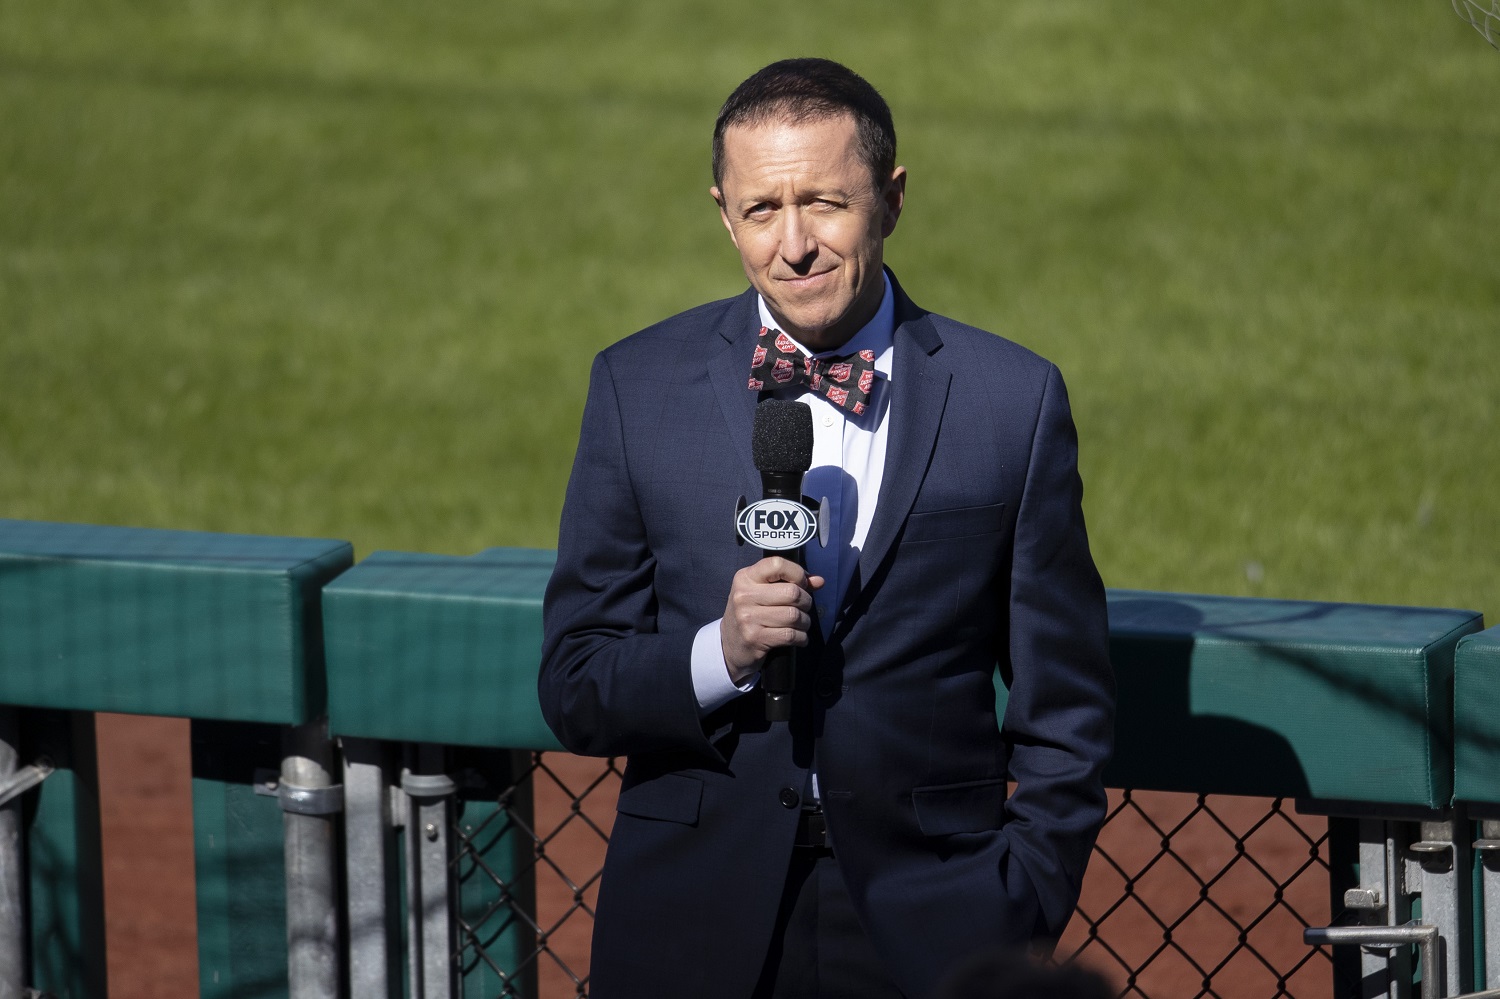 MLB on FOX reporter Ken Rosenthal looks on during the game between the Philadelphia Phillies and Atlanta Braves at Citizens Bank Park on April 3, 2021.